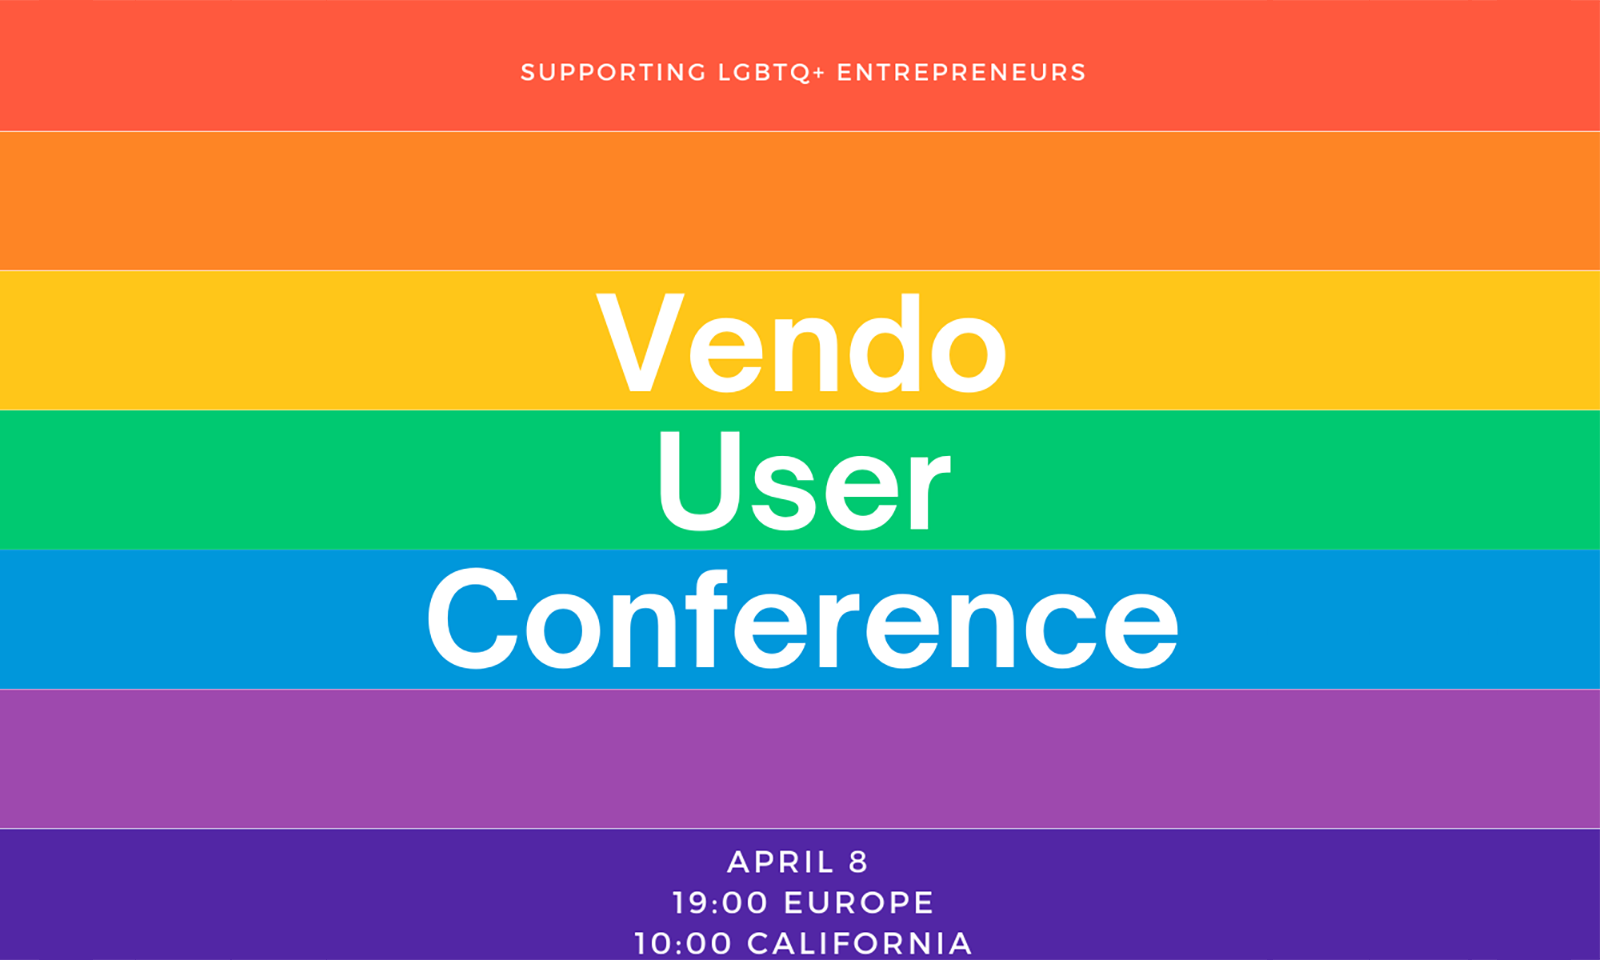 Vendo to Hold LGBTQ+ Online User Conference on April 8